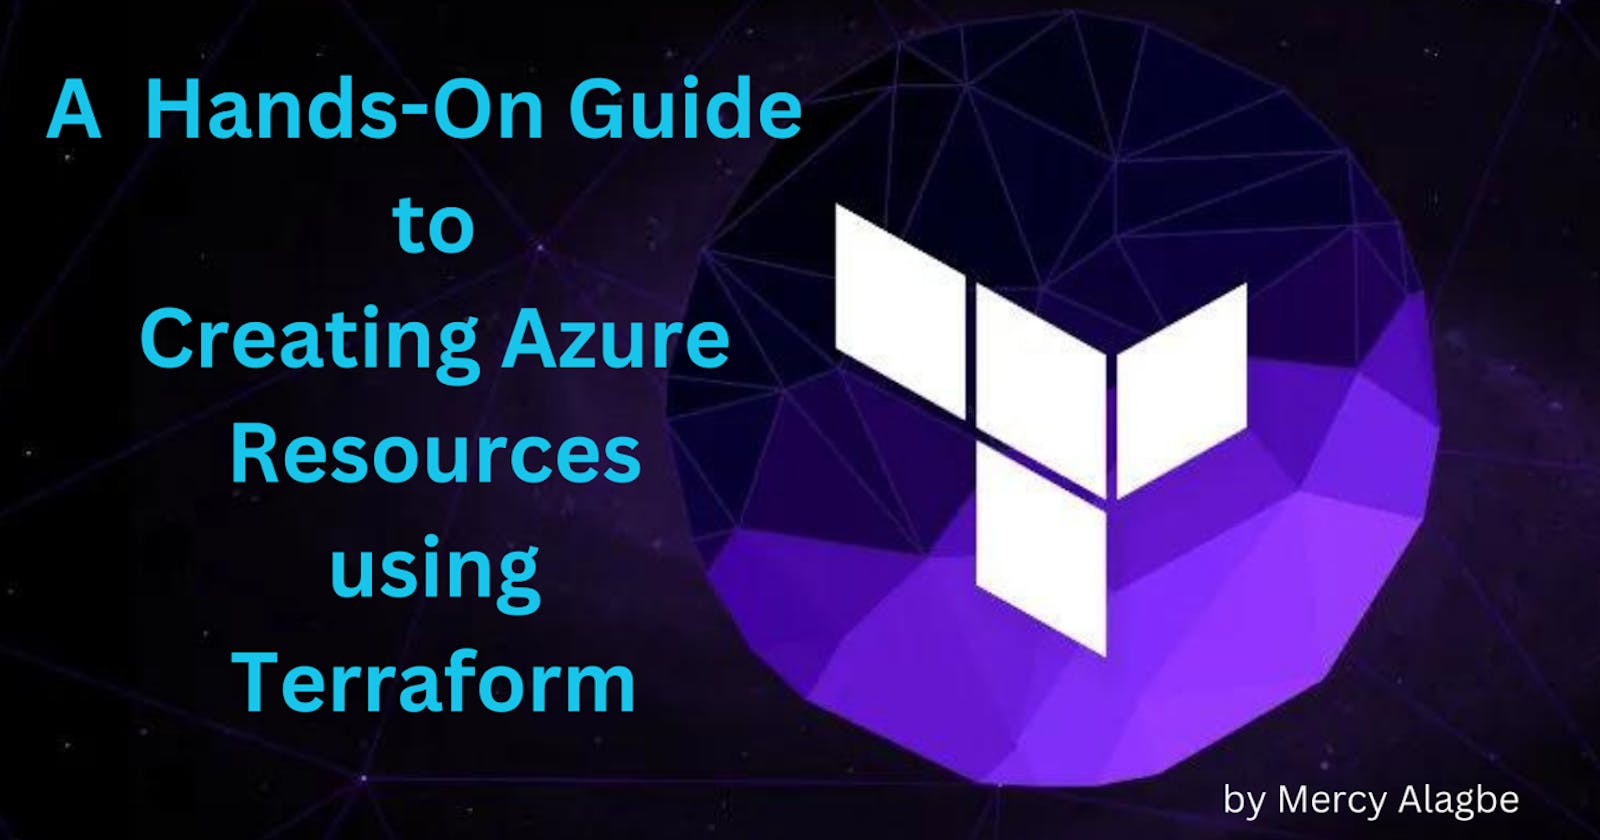 A  Hands-On Guide to creating Azure Resources using  Terraform